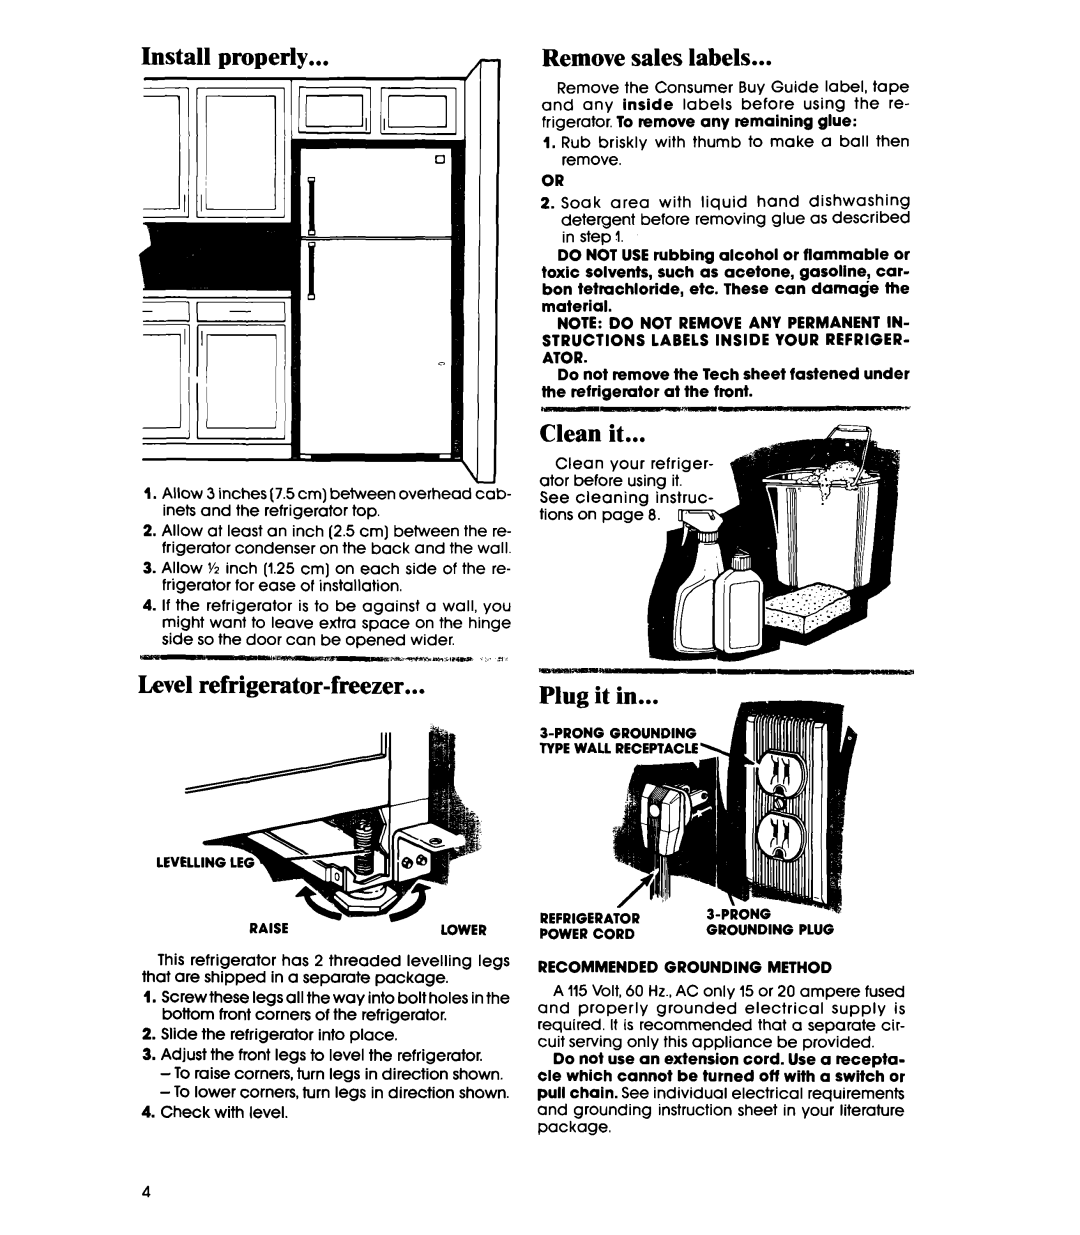 Whirlpool ETl8SK manual Install properly, Level refrigerator-freezer, Clean it, Remove sales labels 